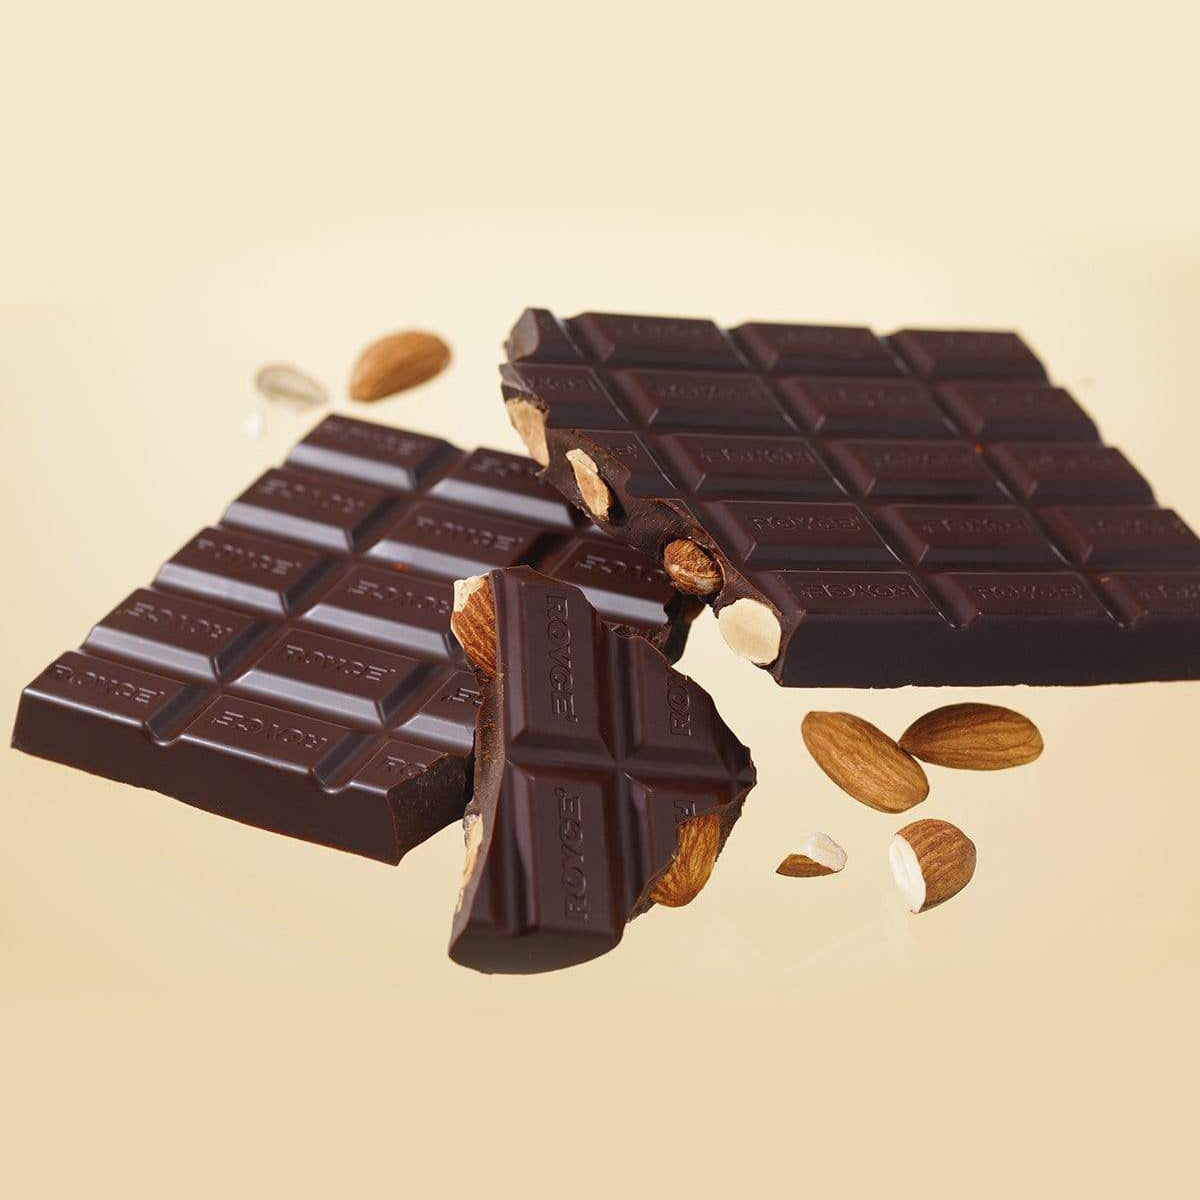 ROYCE' Chocolate - Chocolate Bar "Almond Bitter" - Image shows dark brown chocolate bars with with almonds and the word "ROYCE'" engraved. Background is in pale yellow with accents of almonds.